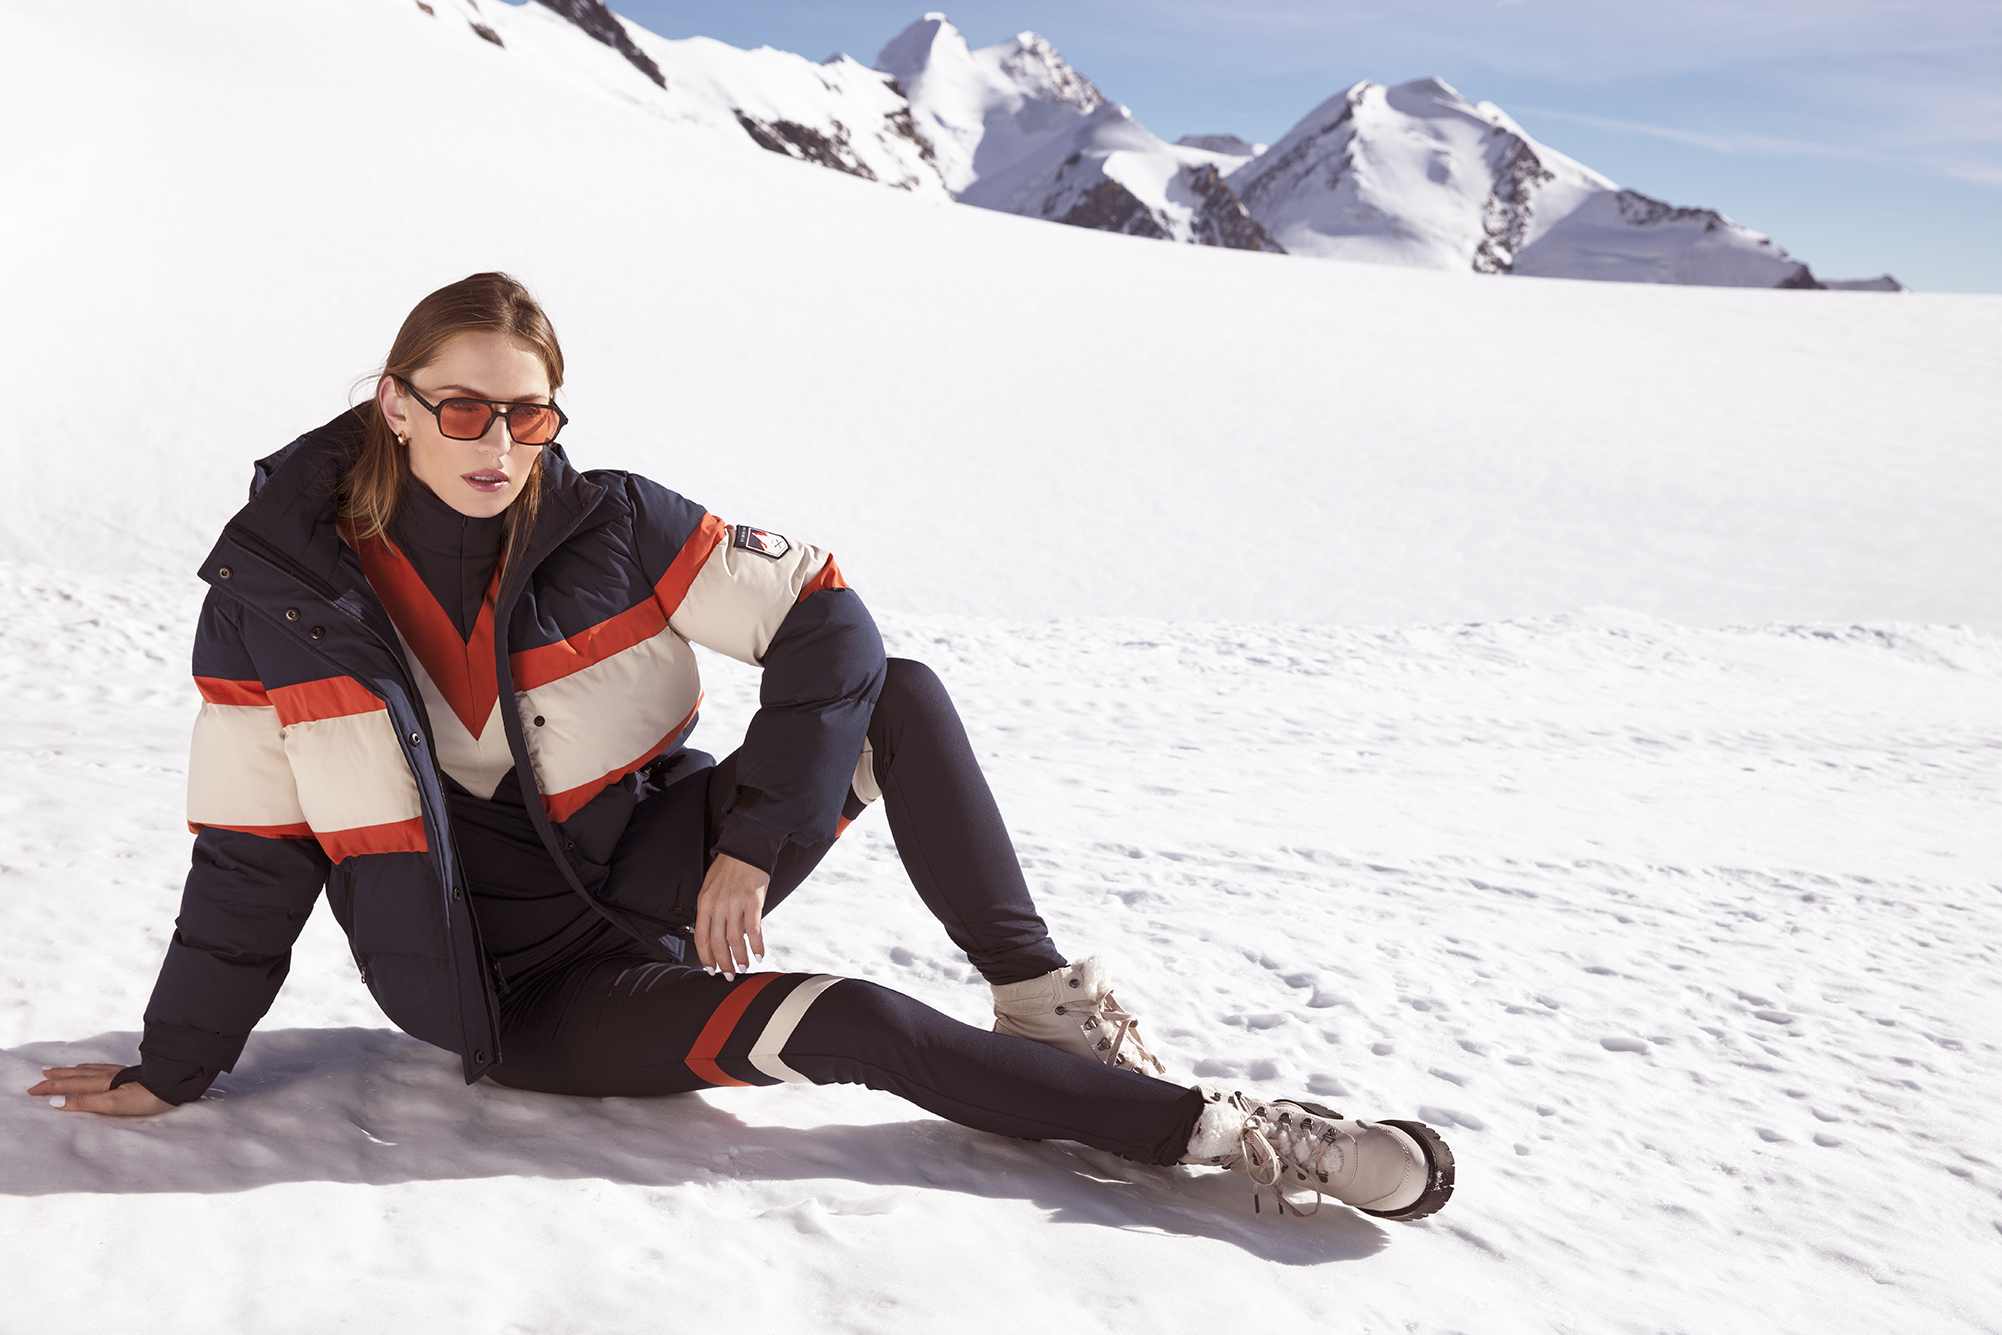 Why The Ski Capsule from By Malina is the ultimate ski collection you need for winter 21/22. 6